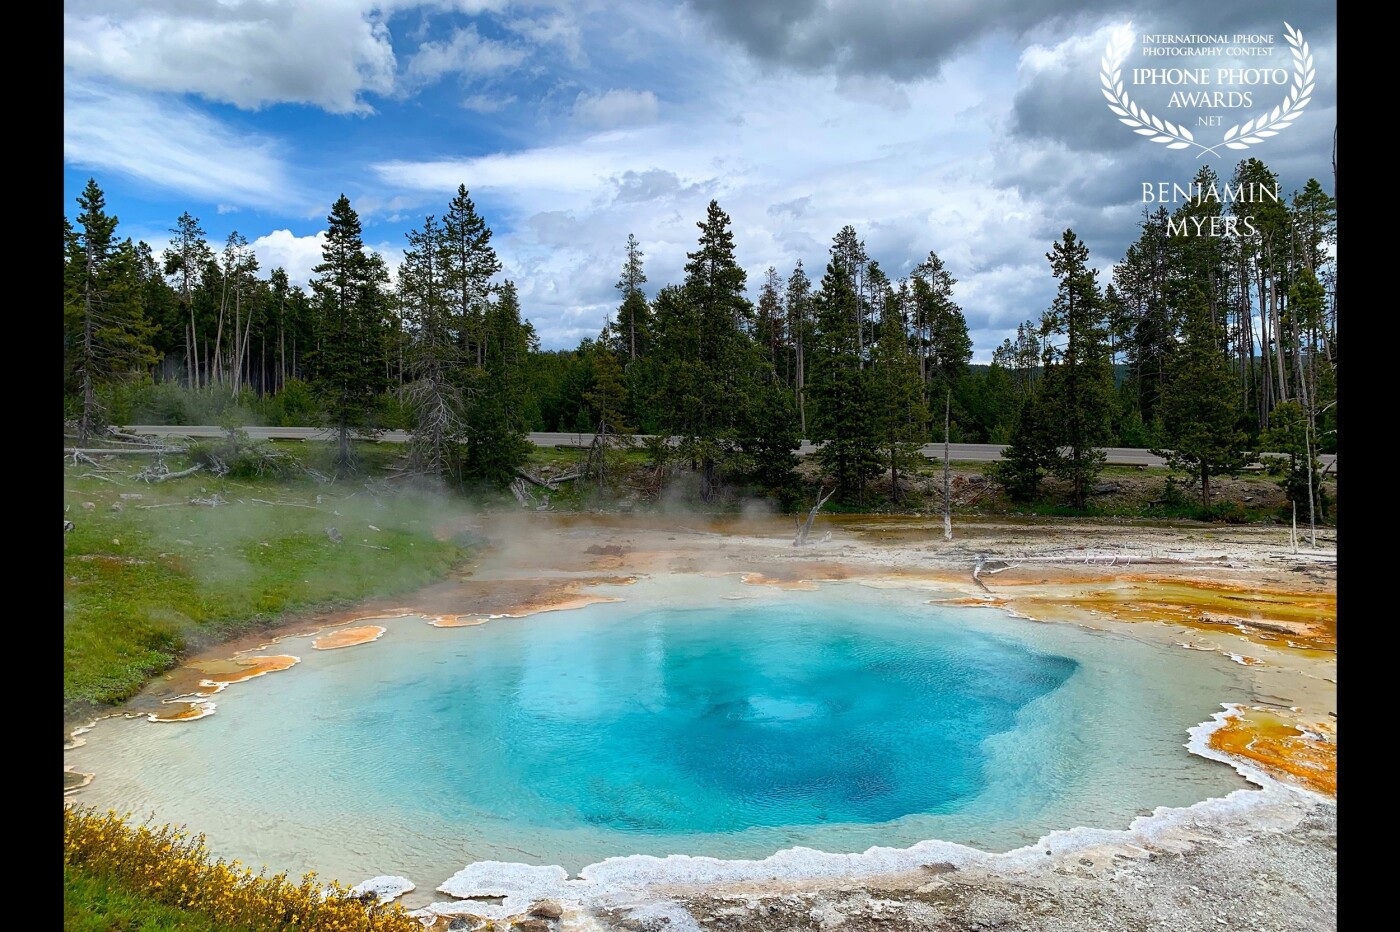 As part of our last summer vacation, we drove through Yellowstone. We stopped to walk the boardwalks around the sulfur ponds. The mineral content makes the water look inviting but it’s very hot, so I wouldn’t advise going for a swim. 